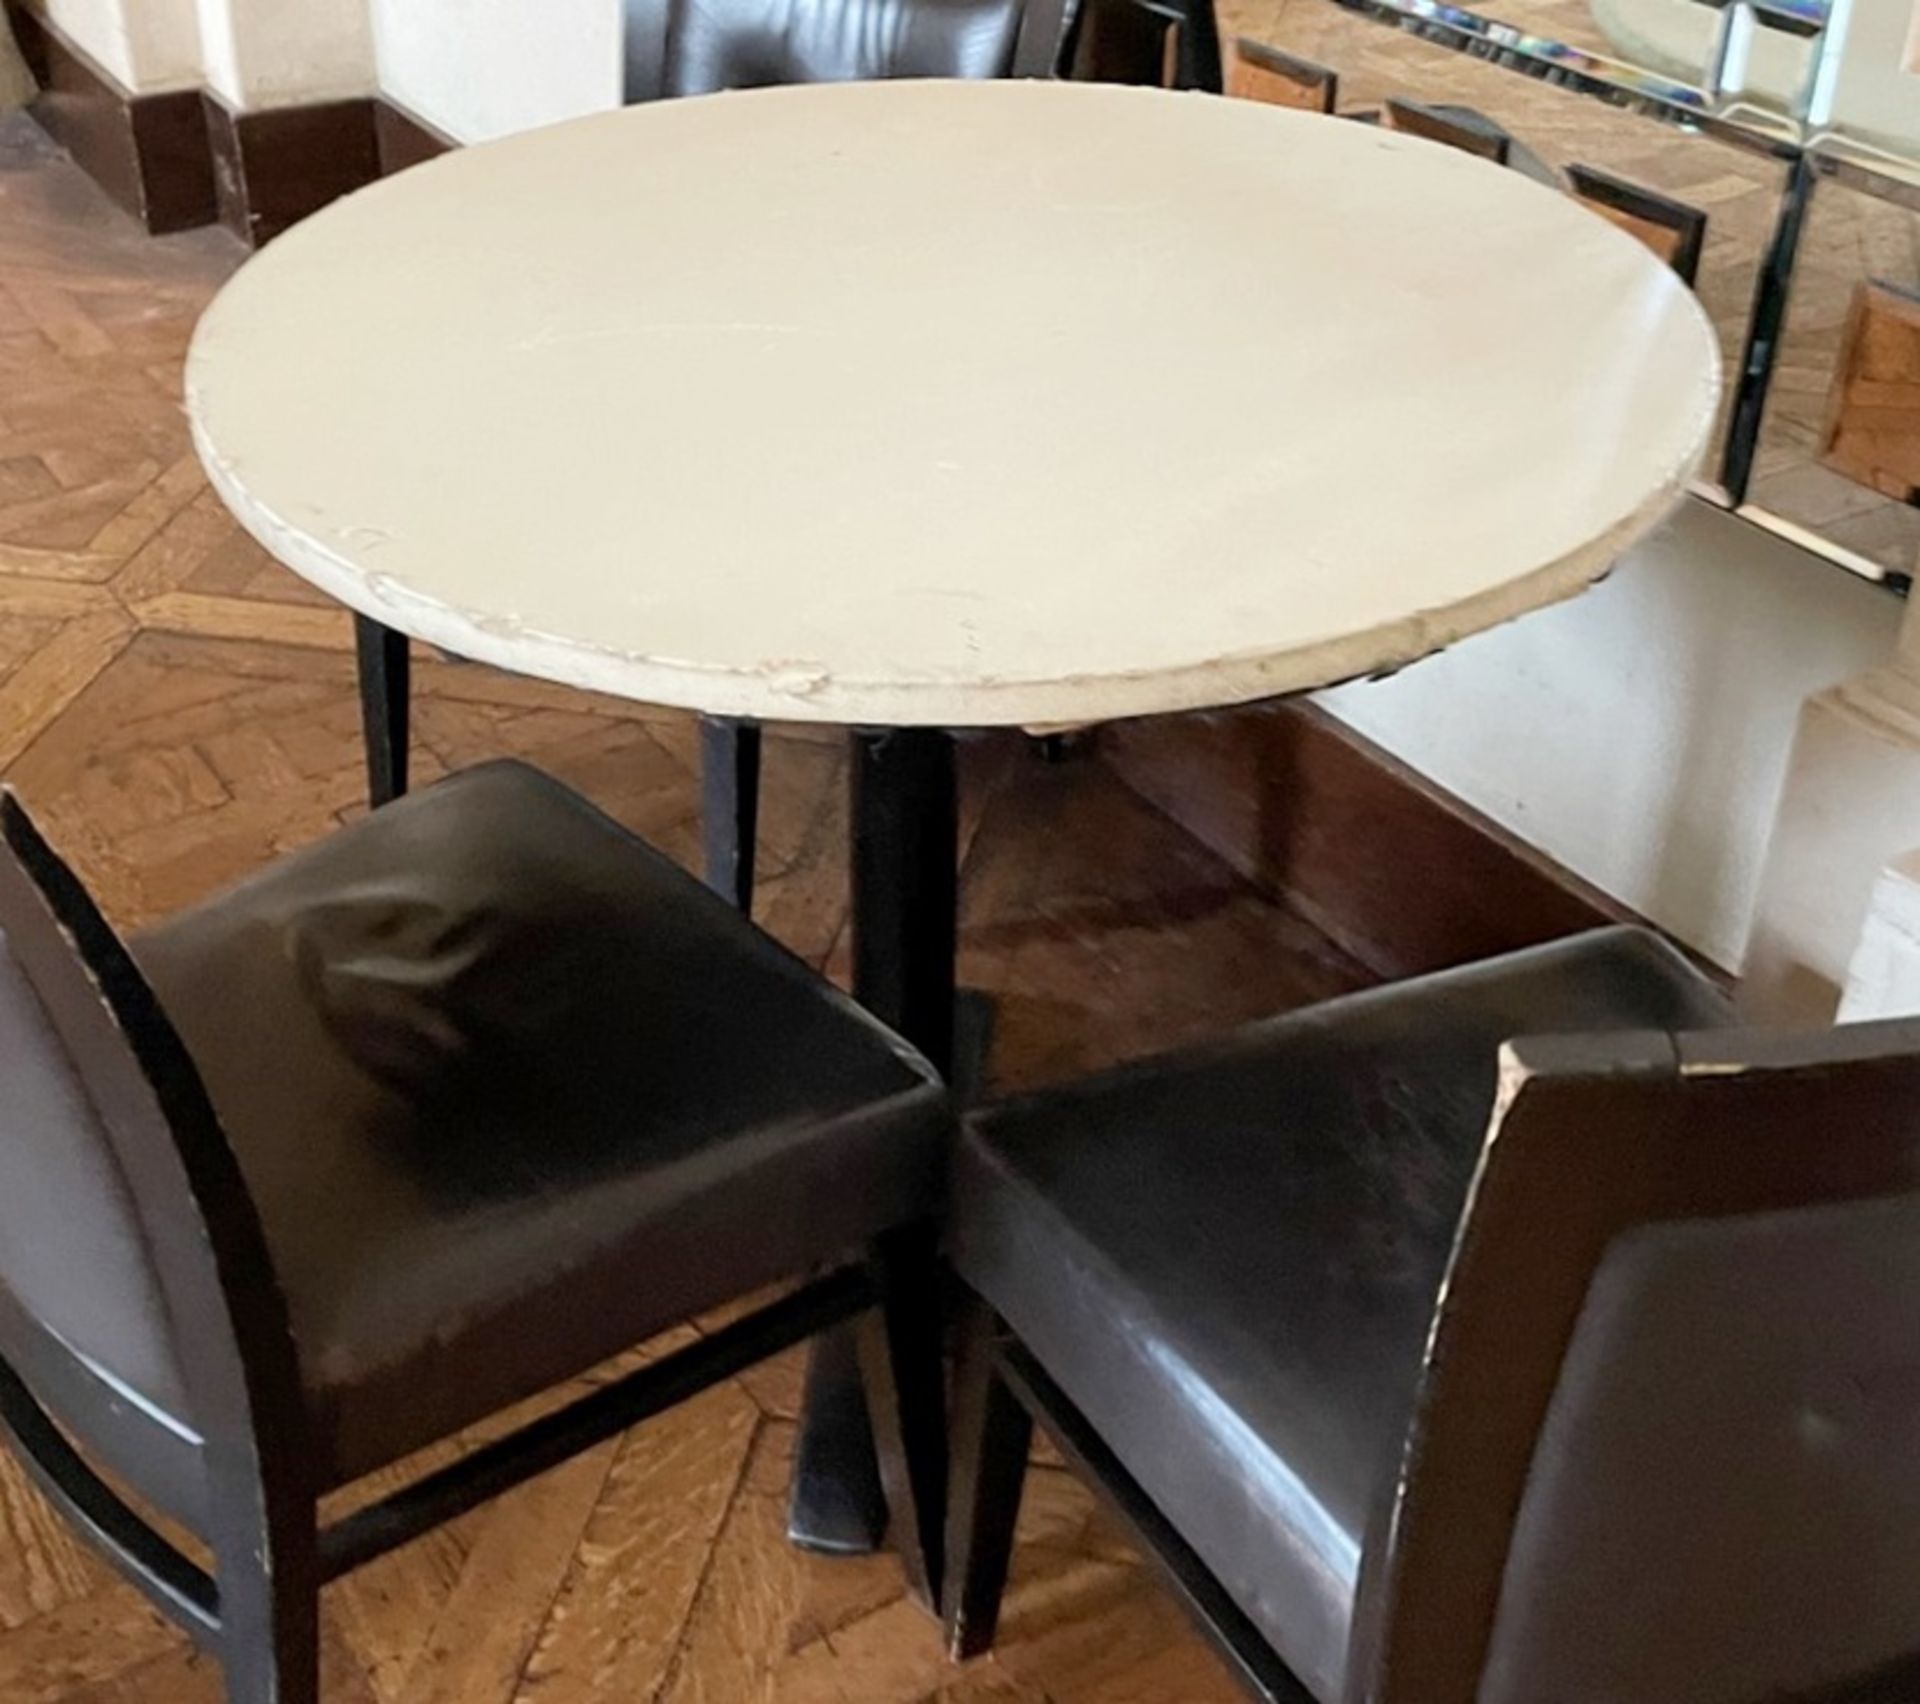 8 x Large Round Commercial Restaurant Tables Upholstered Leather - 2 x Sizes Supplied - Ref: BLVD107 - Image 4 of 13